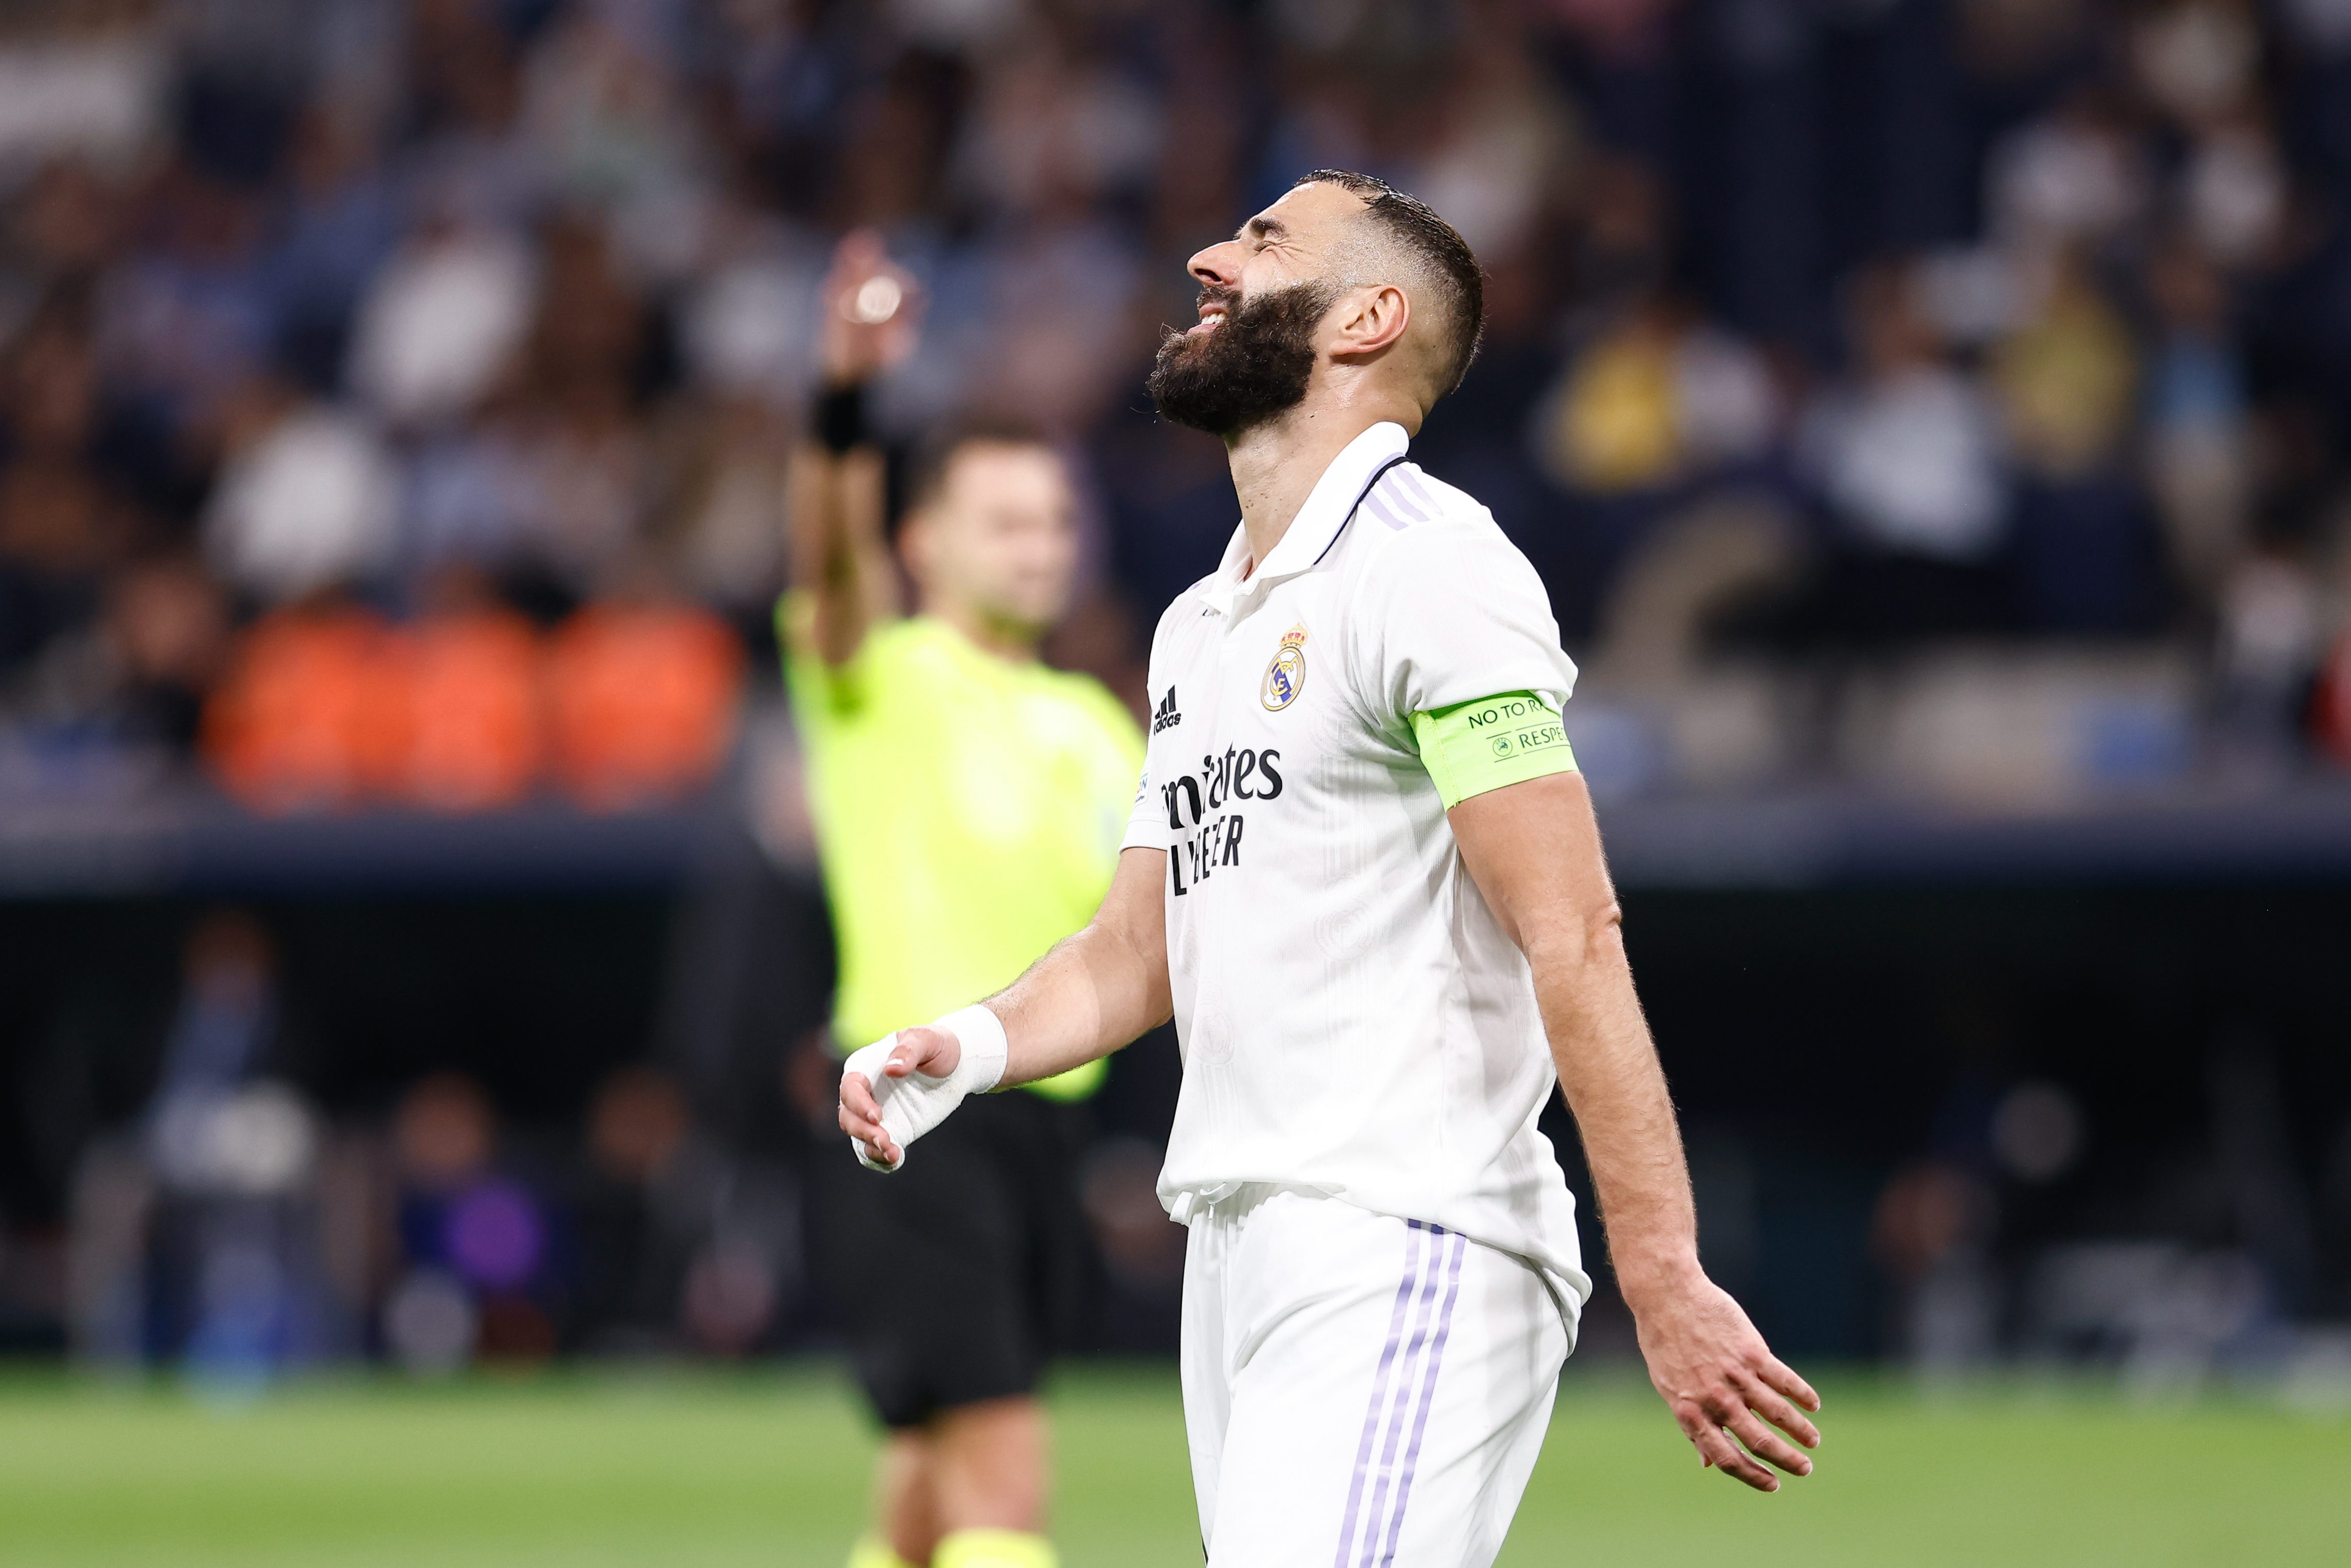 Benzema, during the match between Real Madrid and Shakhtar Donetsk at the Santiago Bernabeu.